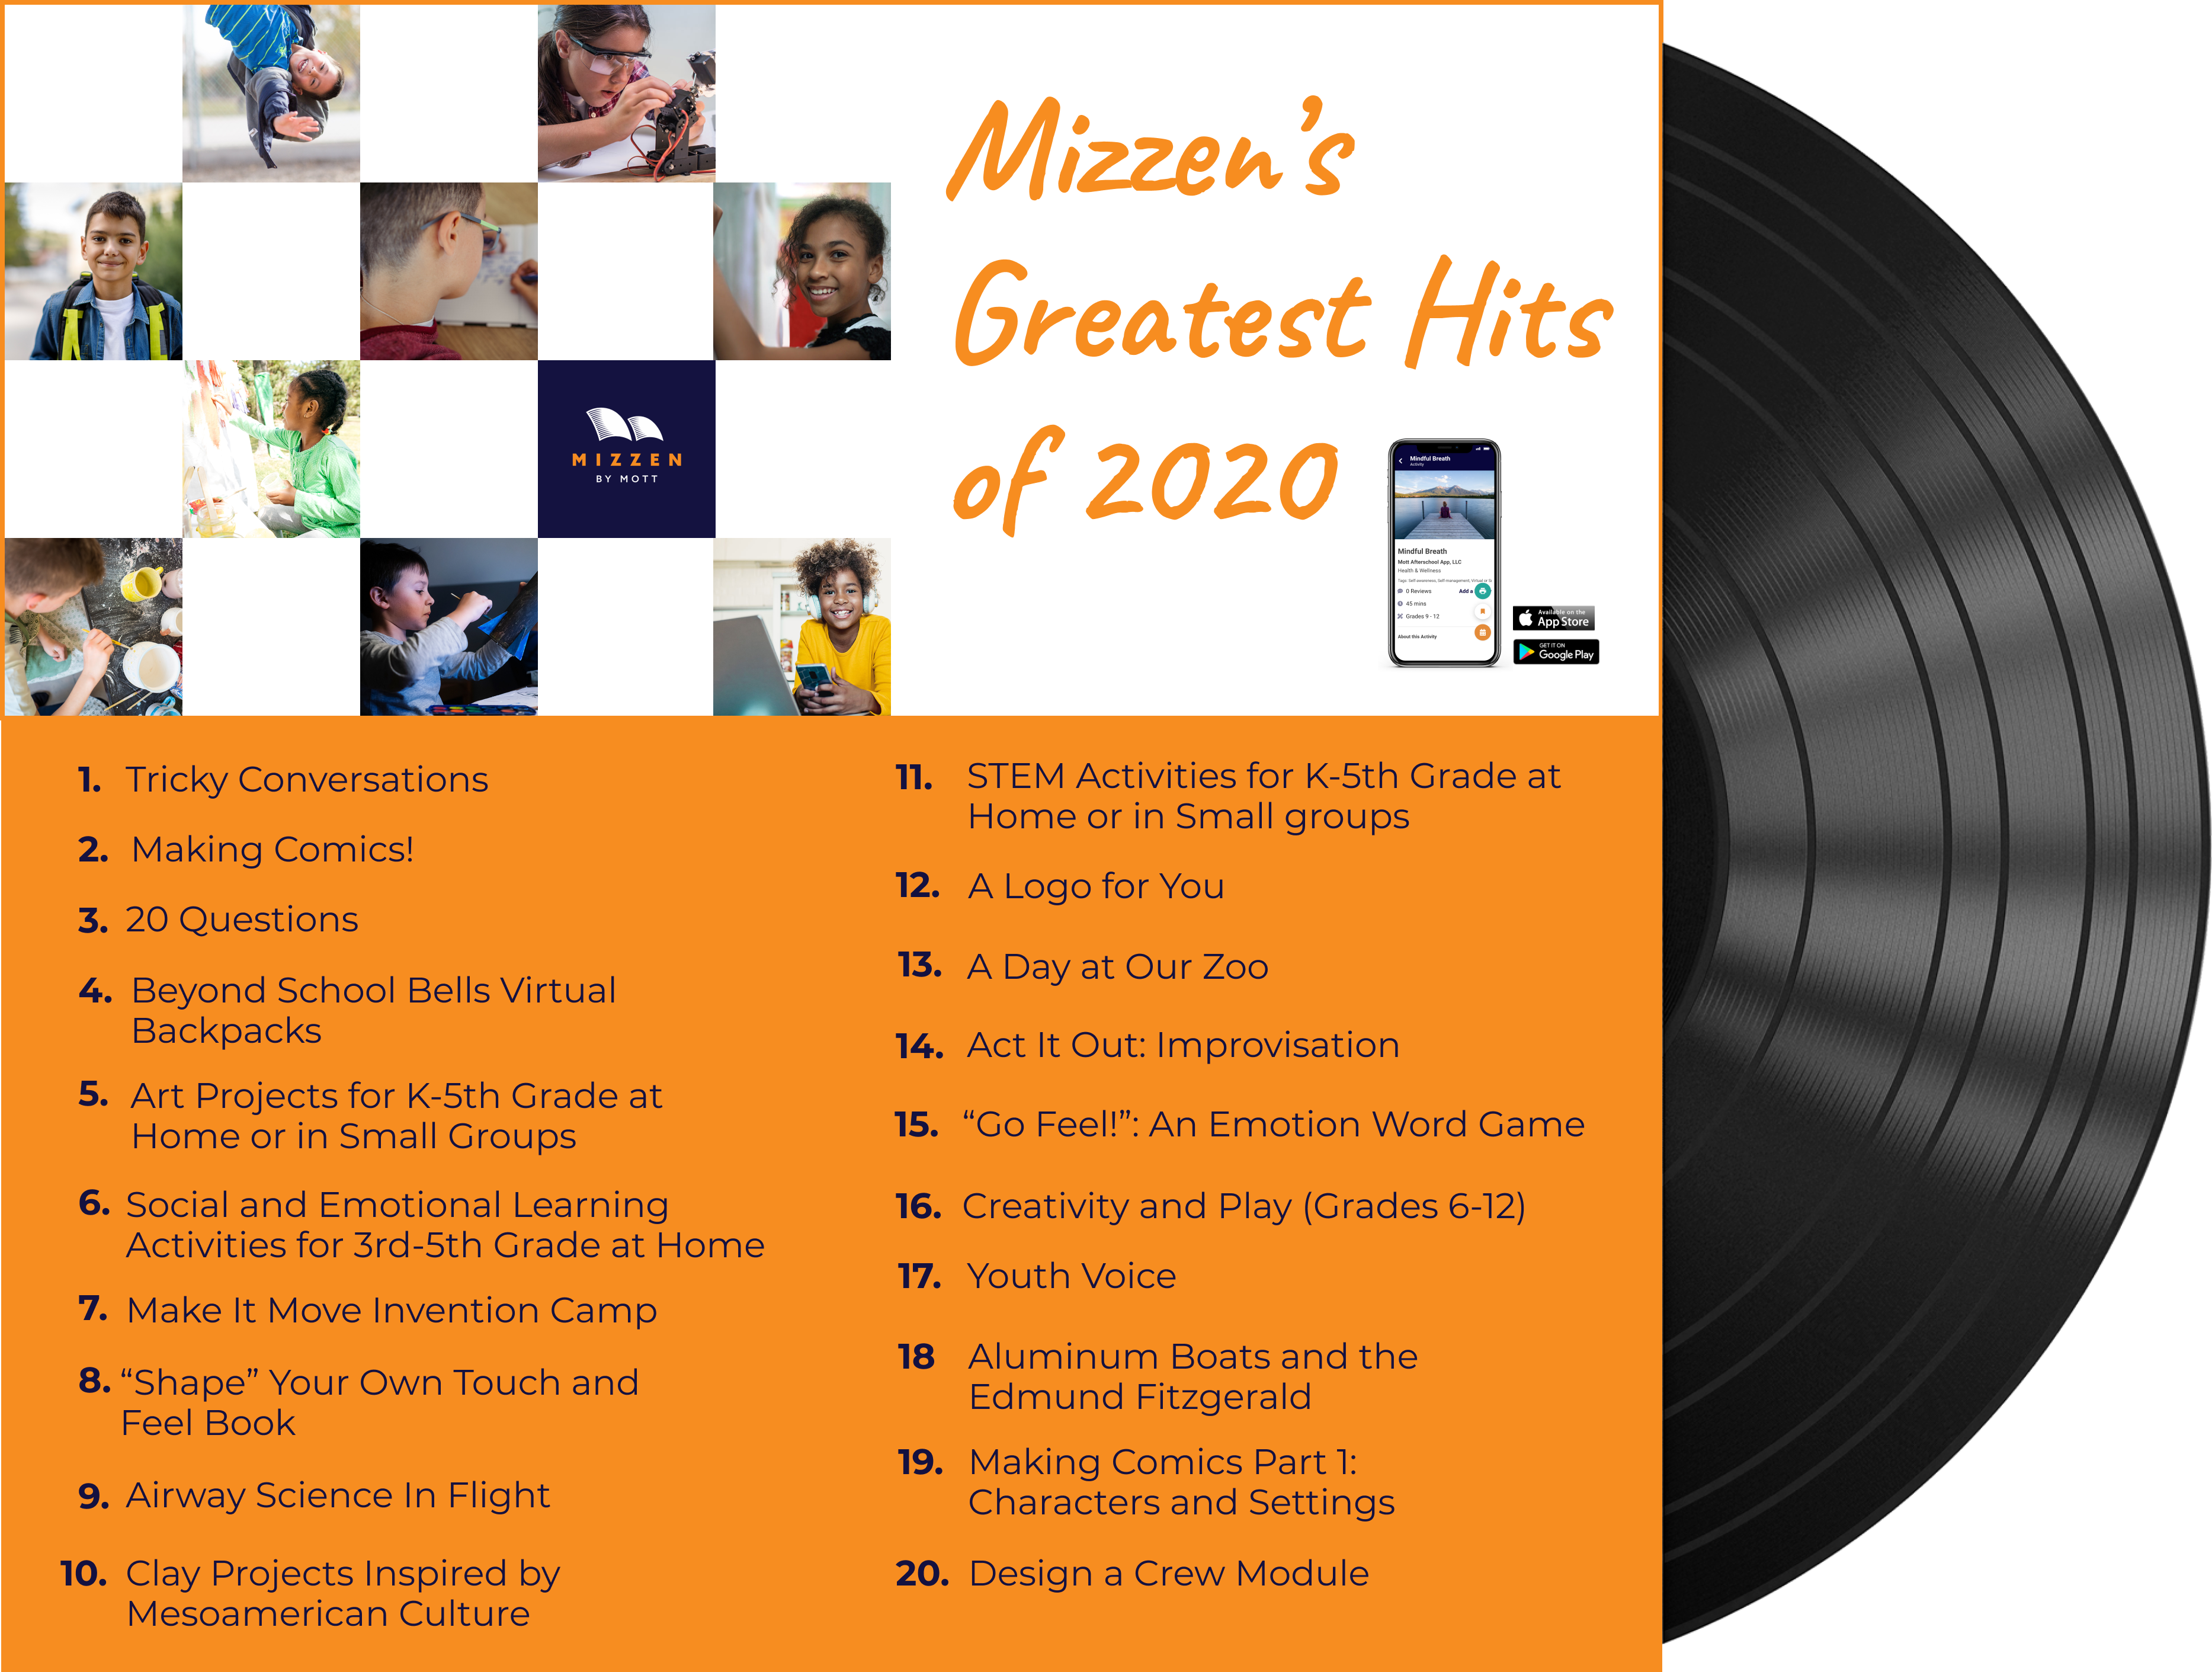 Greatest Hits Album Cover with 20 activities listed for afterschool programs from the Mizzen app